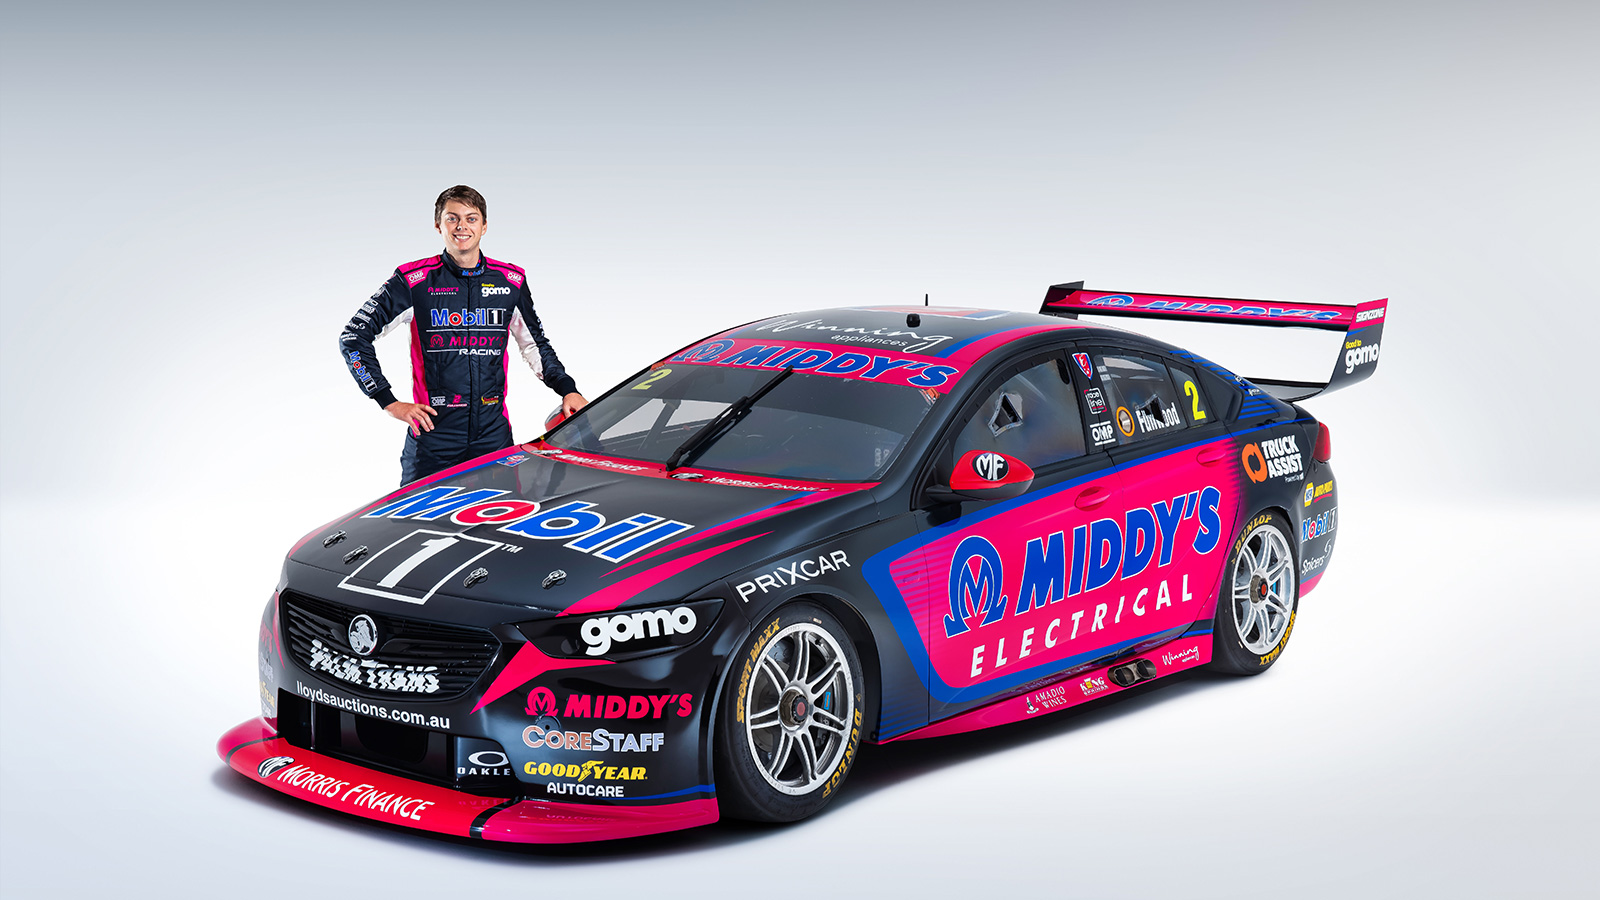 Bryce Fullwood with his new look Mobil 1 Middy’s Racing No. 2.